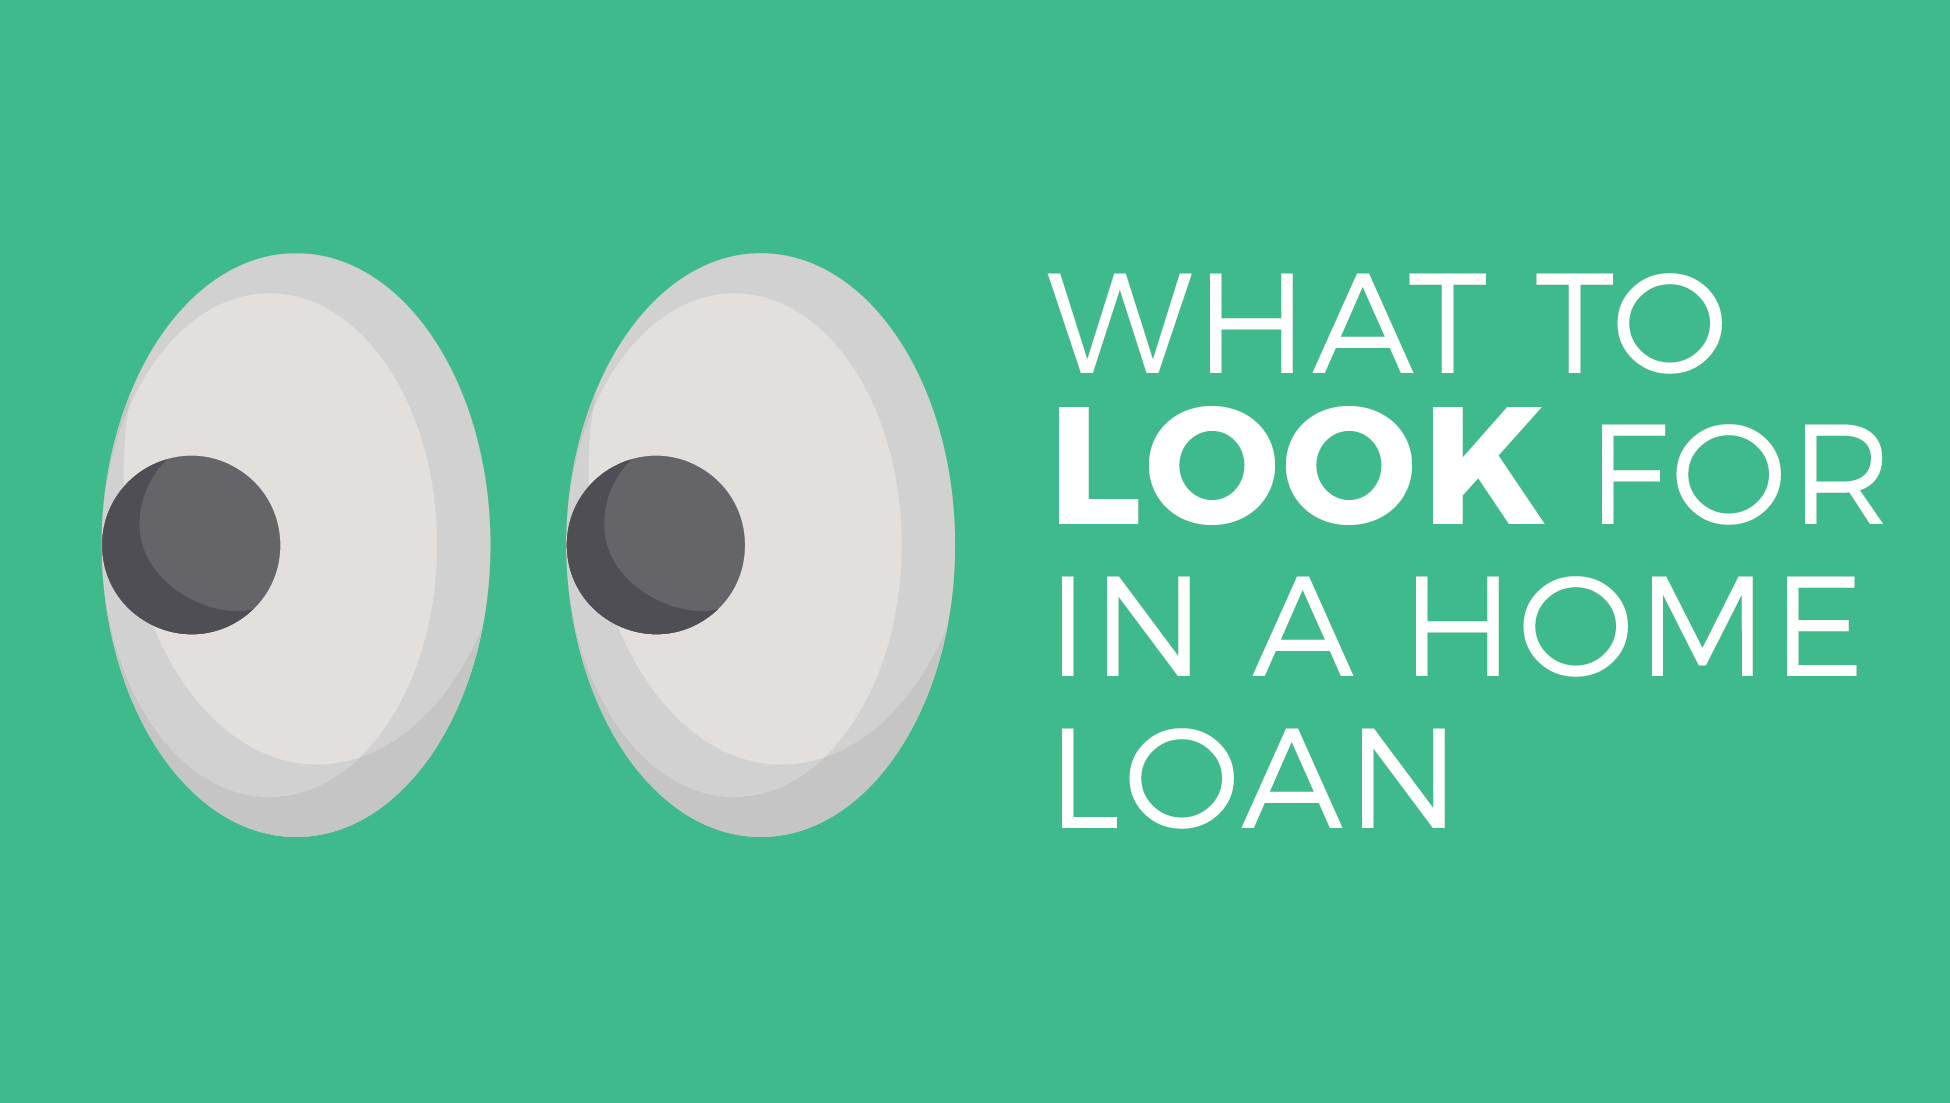 What to look for in a home loan